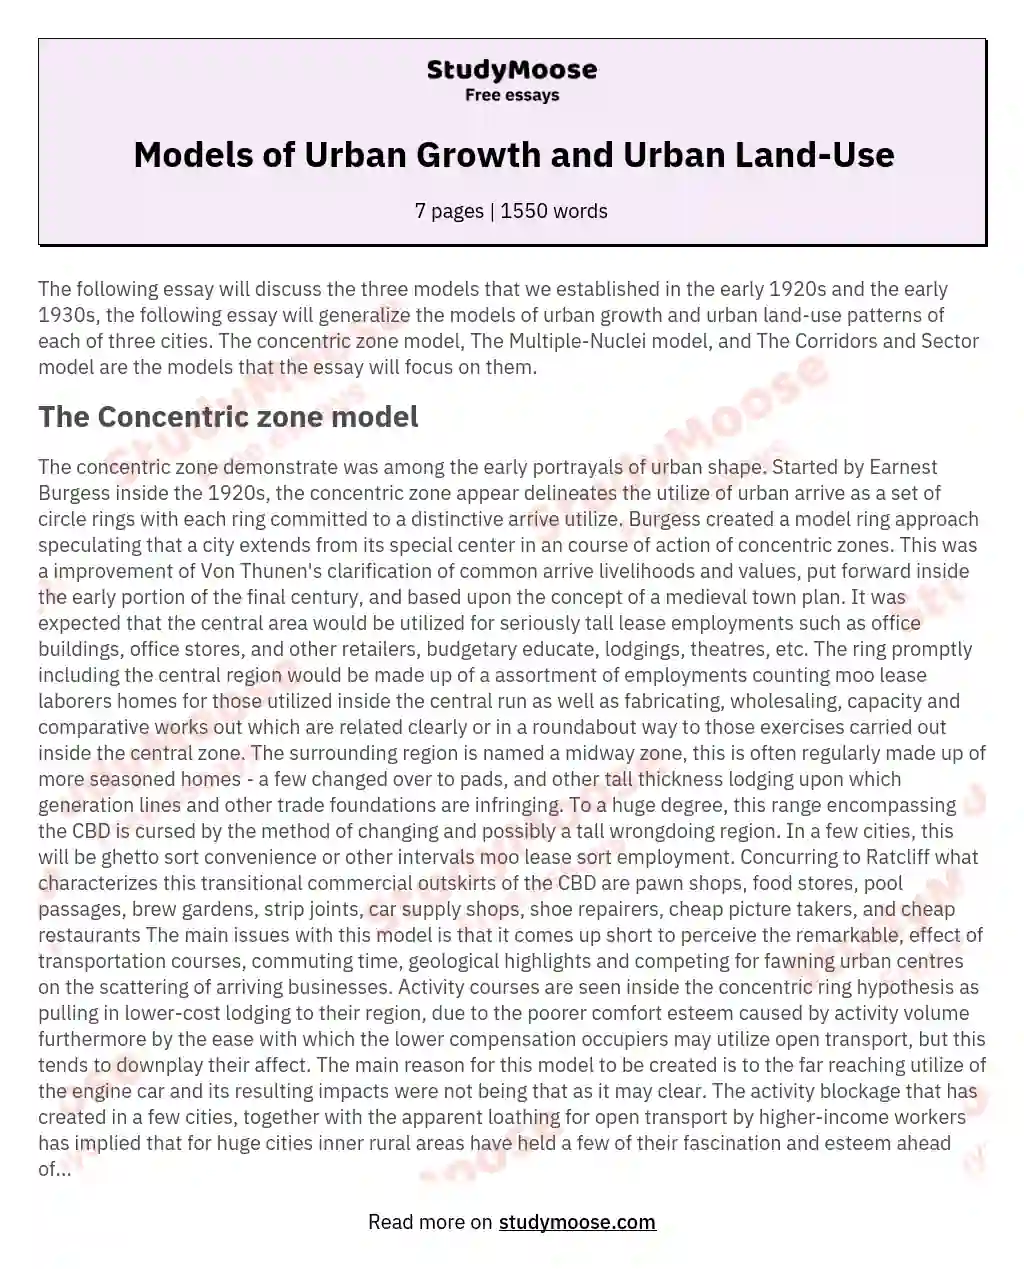 Models of Urban Growth and Urban Land-Use